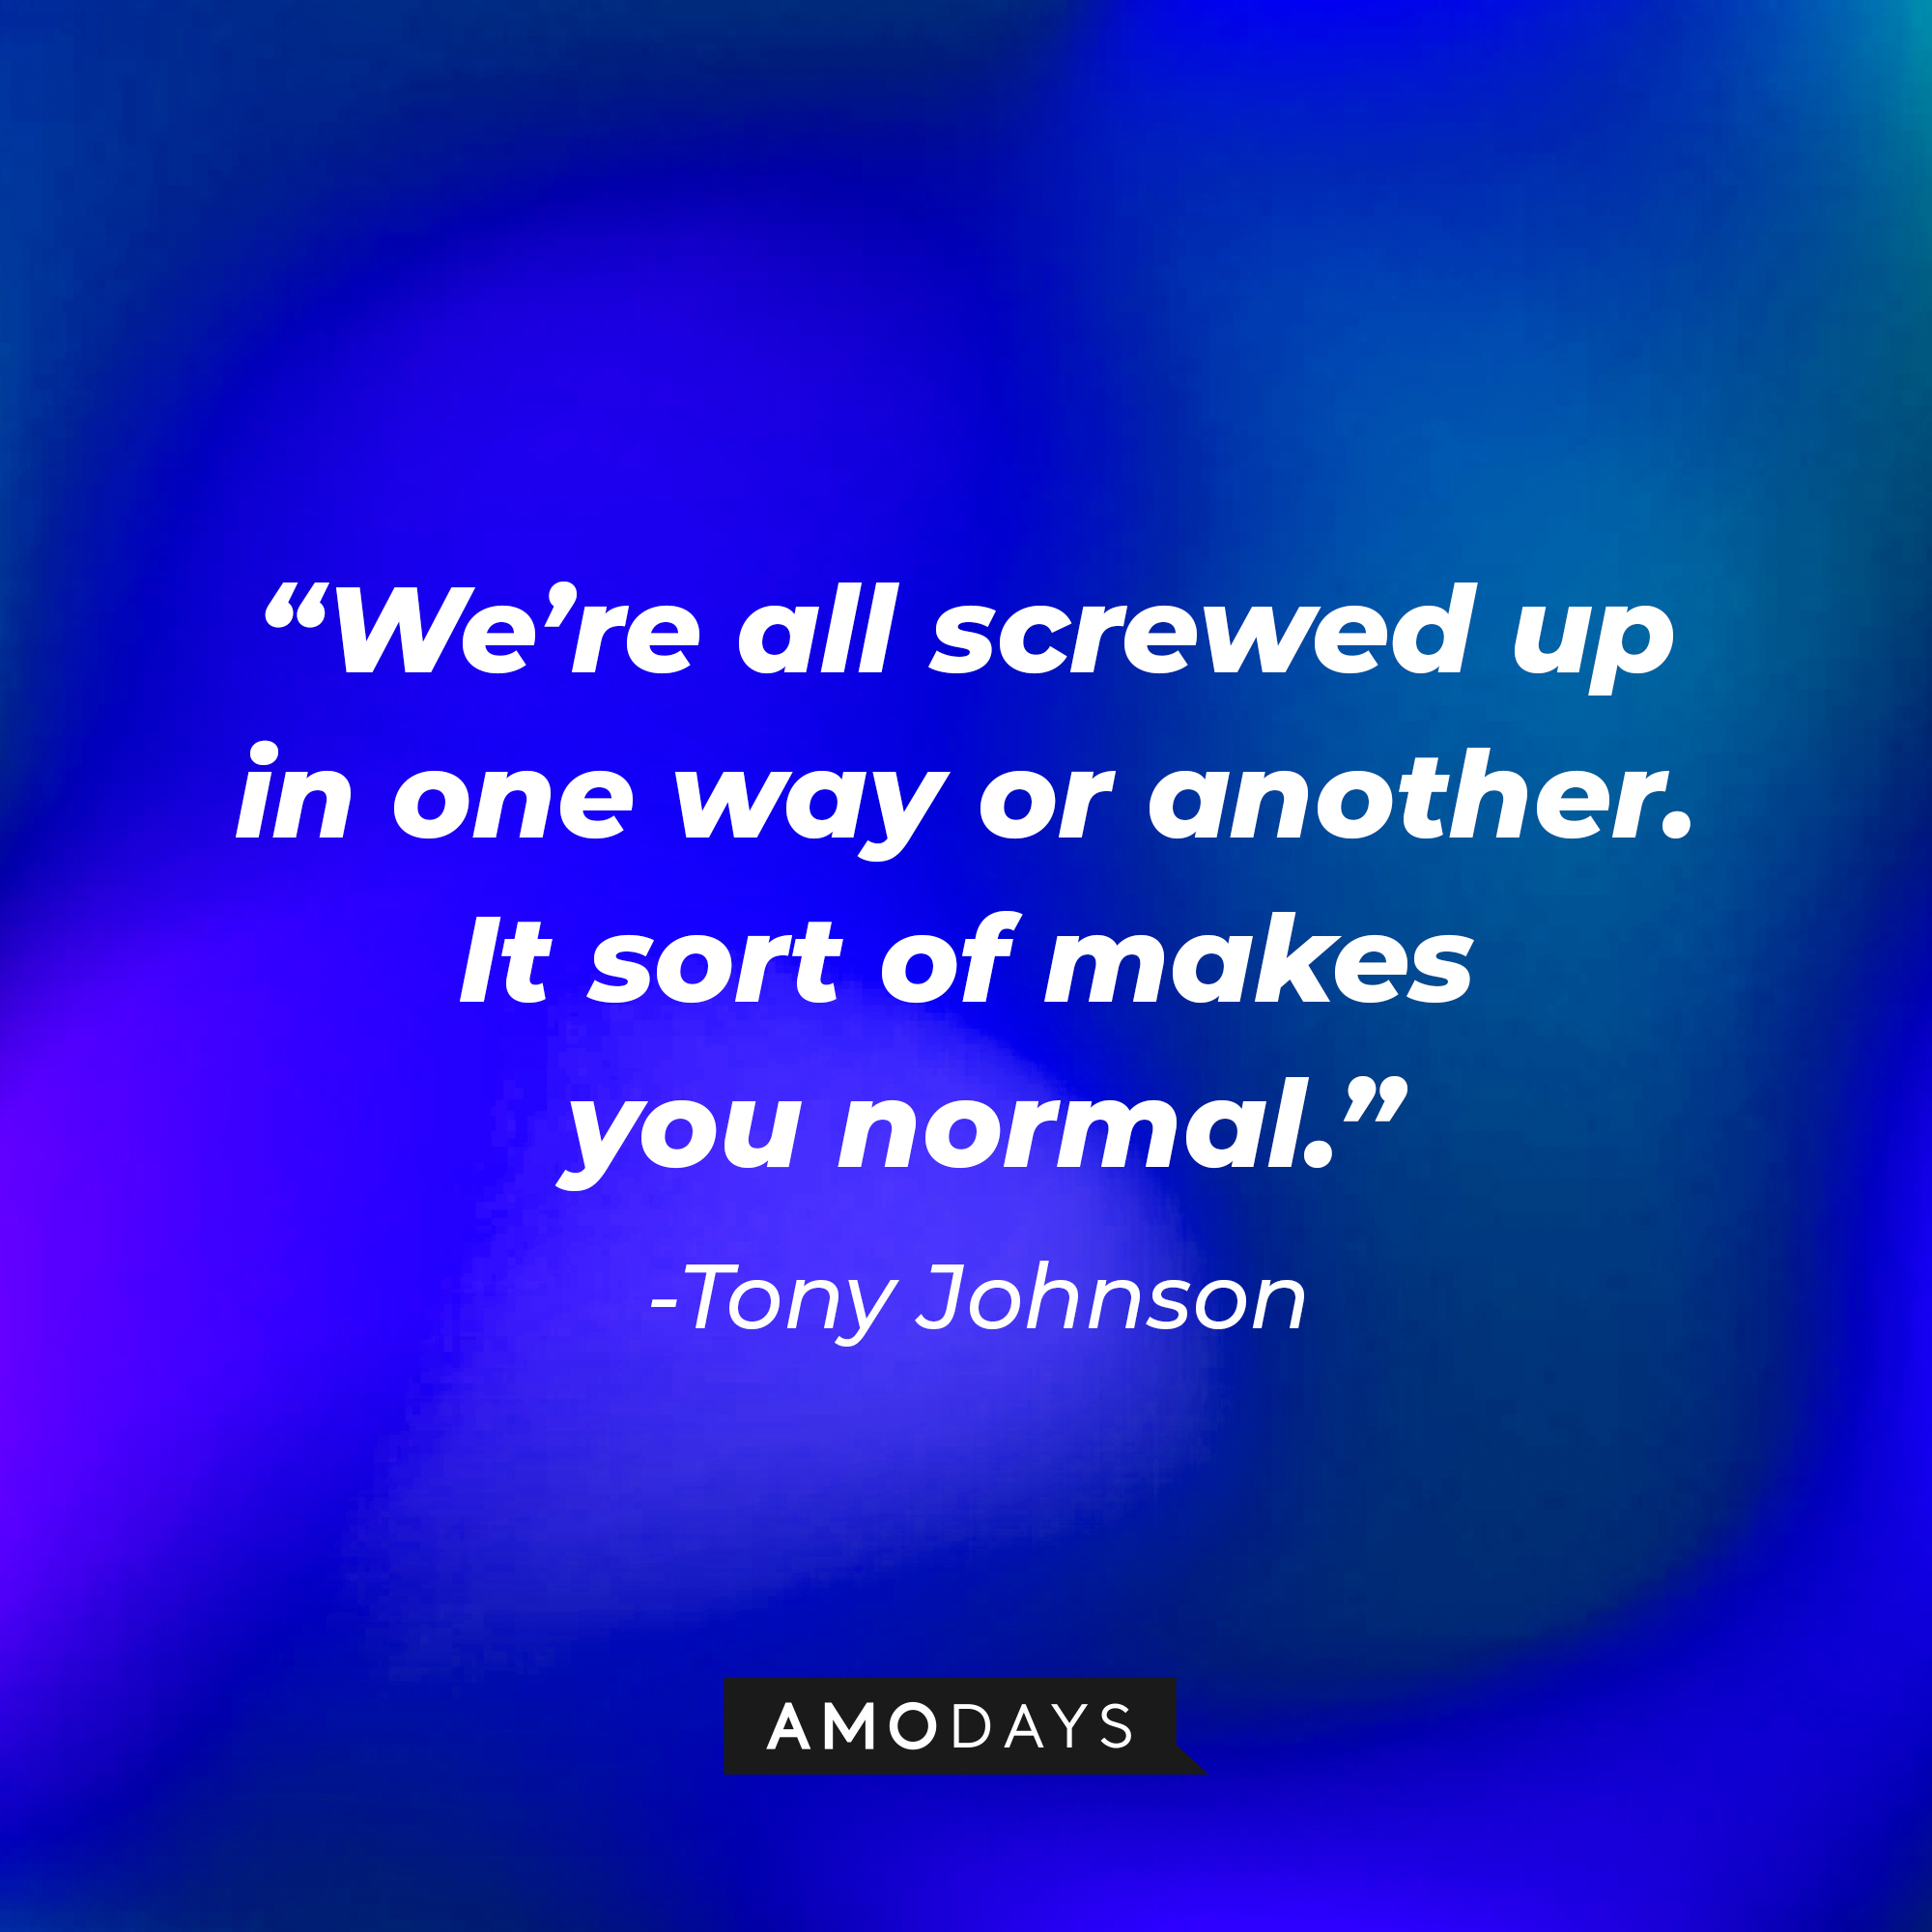 Tony Johnson’s quote: “We’re all screwed up in one way or another. It sort of makes you normal.”   |  Source: AmoDays